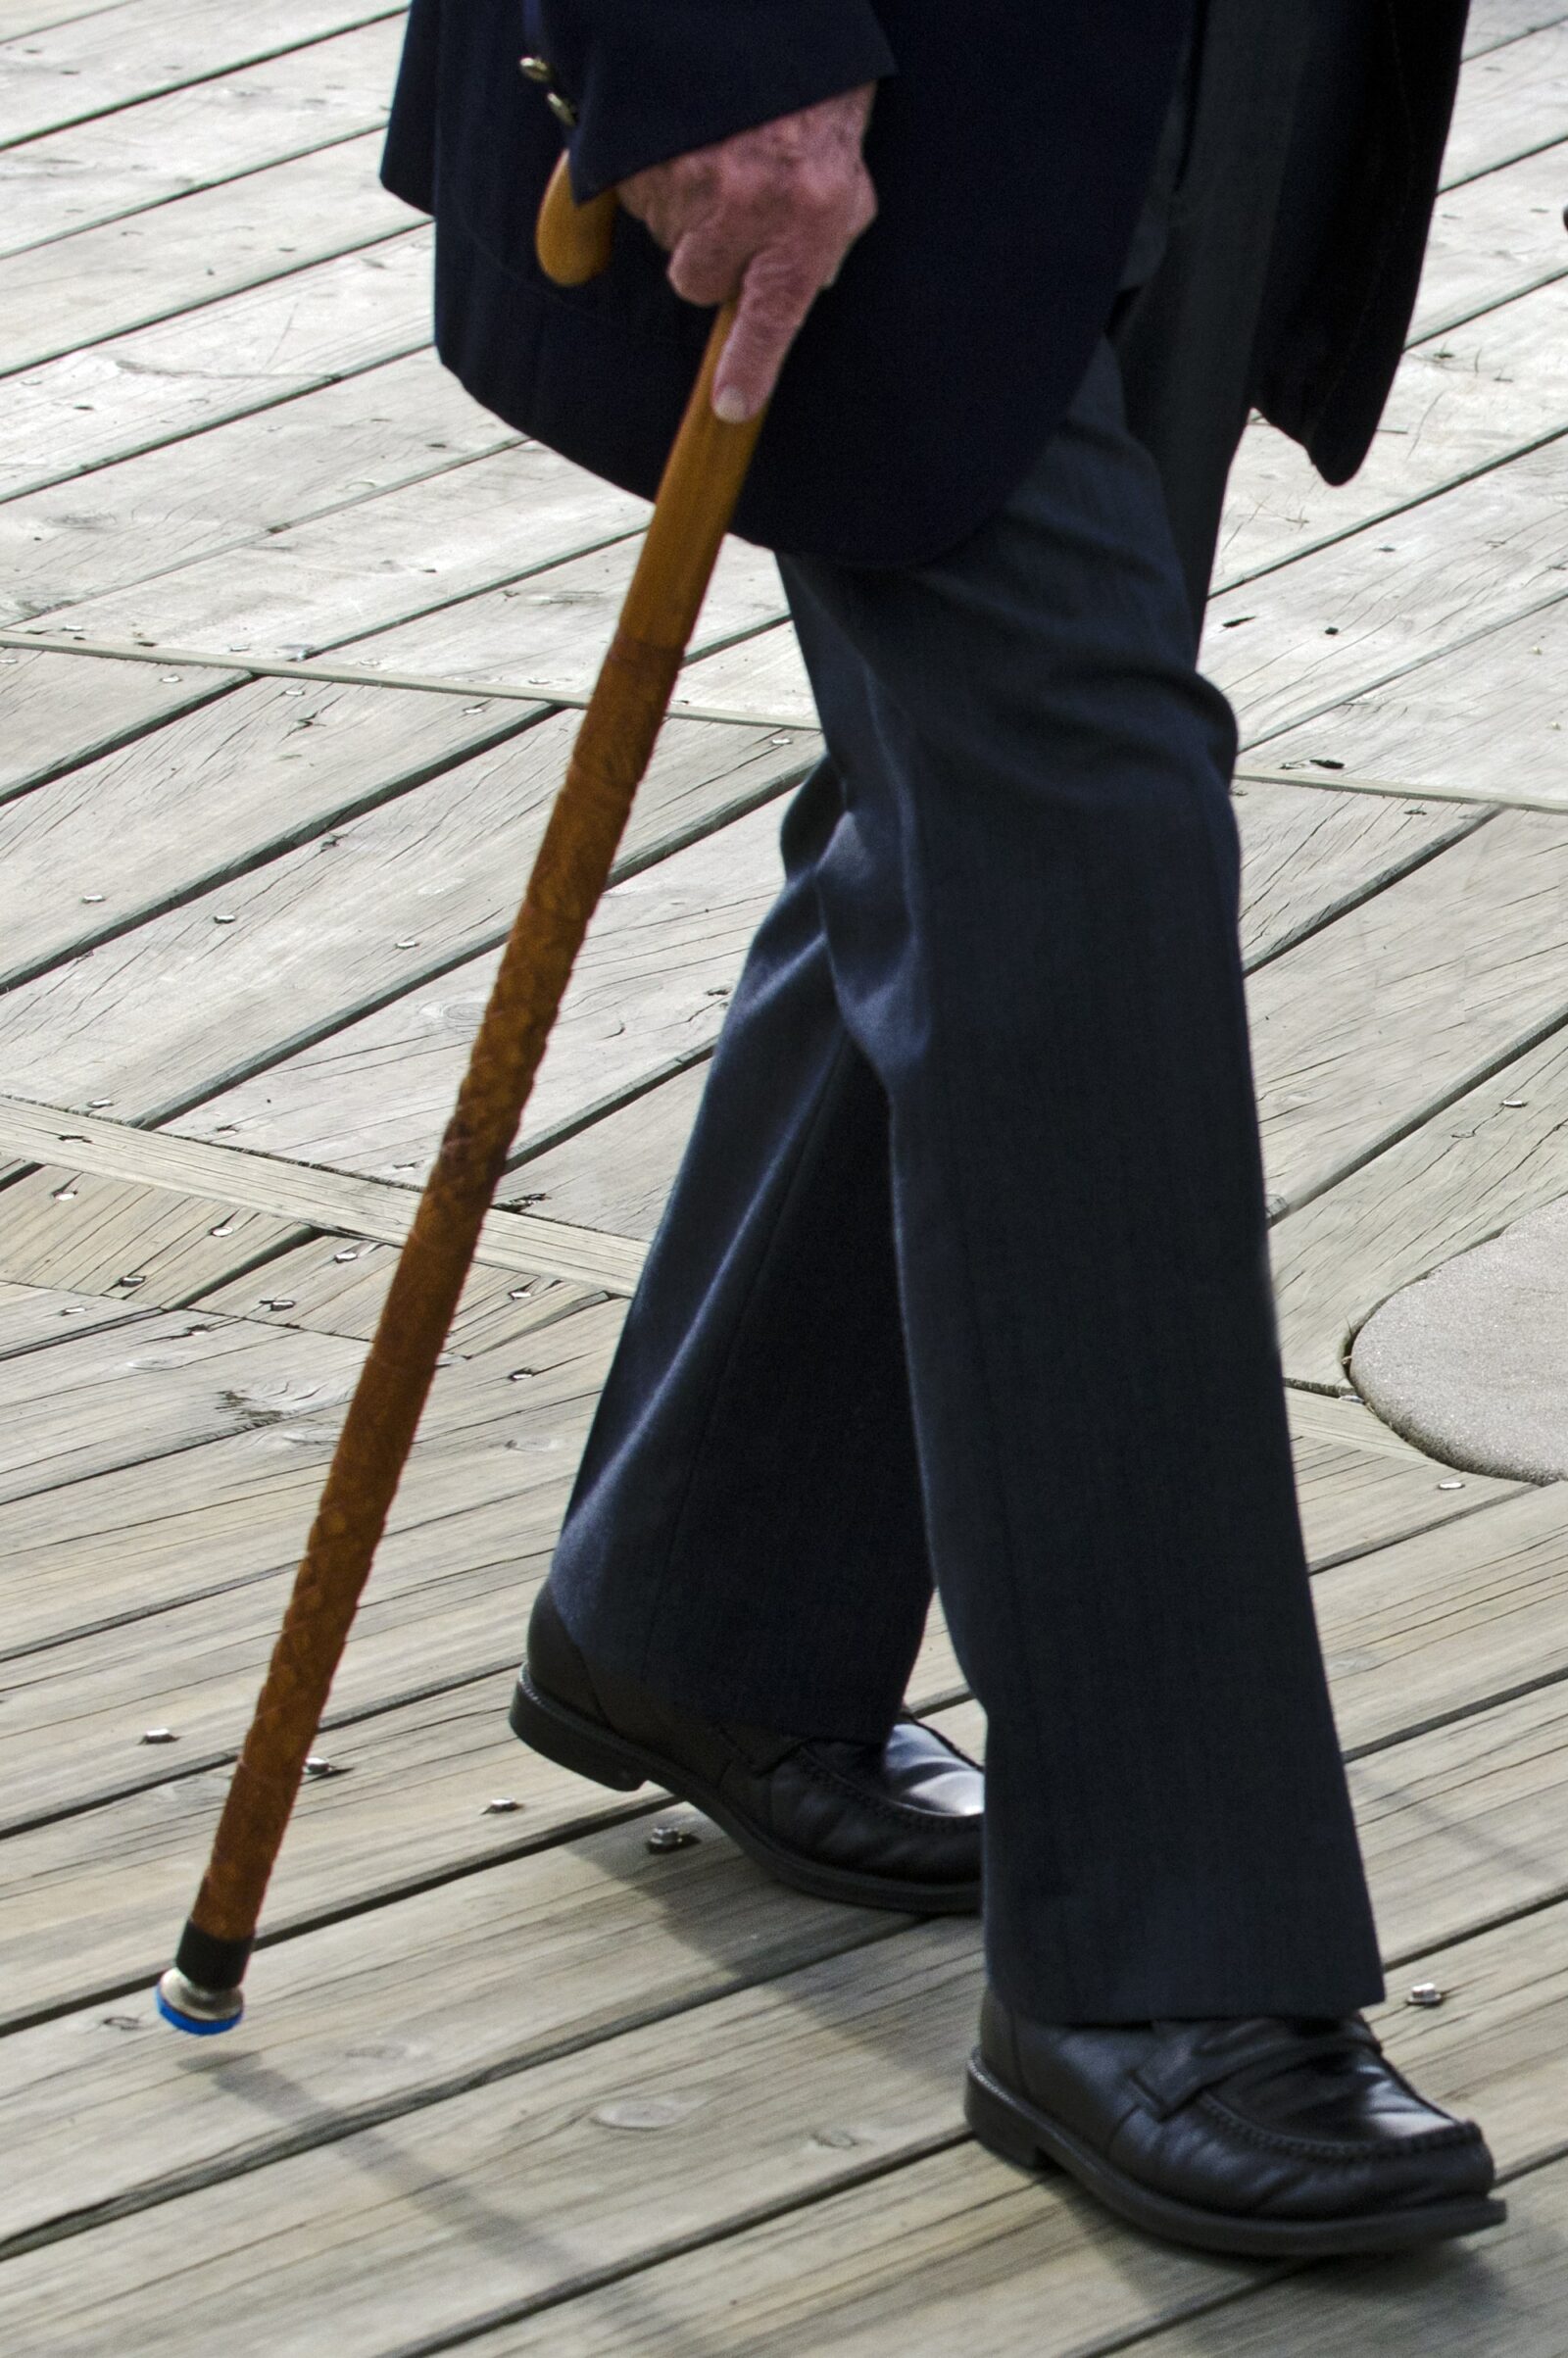 lower half of a man walking with cane